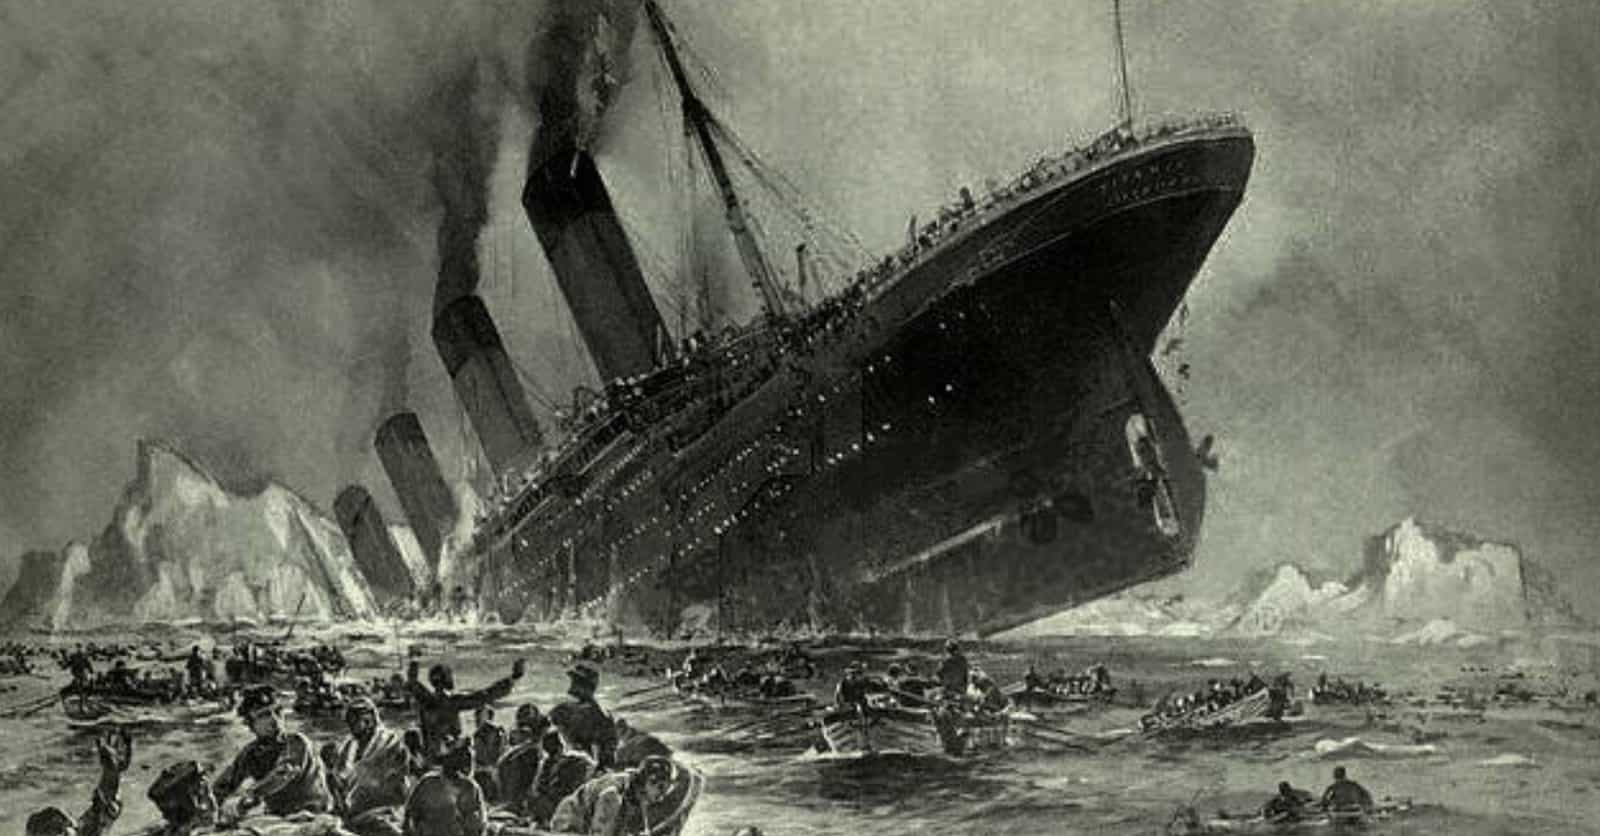 Everything Historians Think Went Wrong That Led To The Sinking Of The 'Titanic'